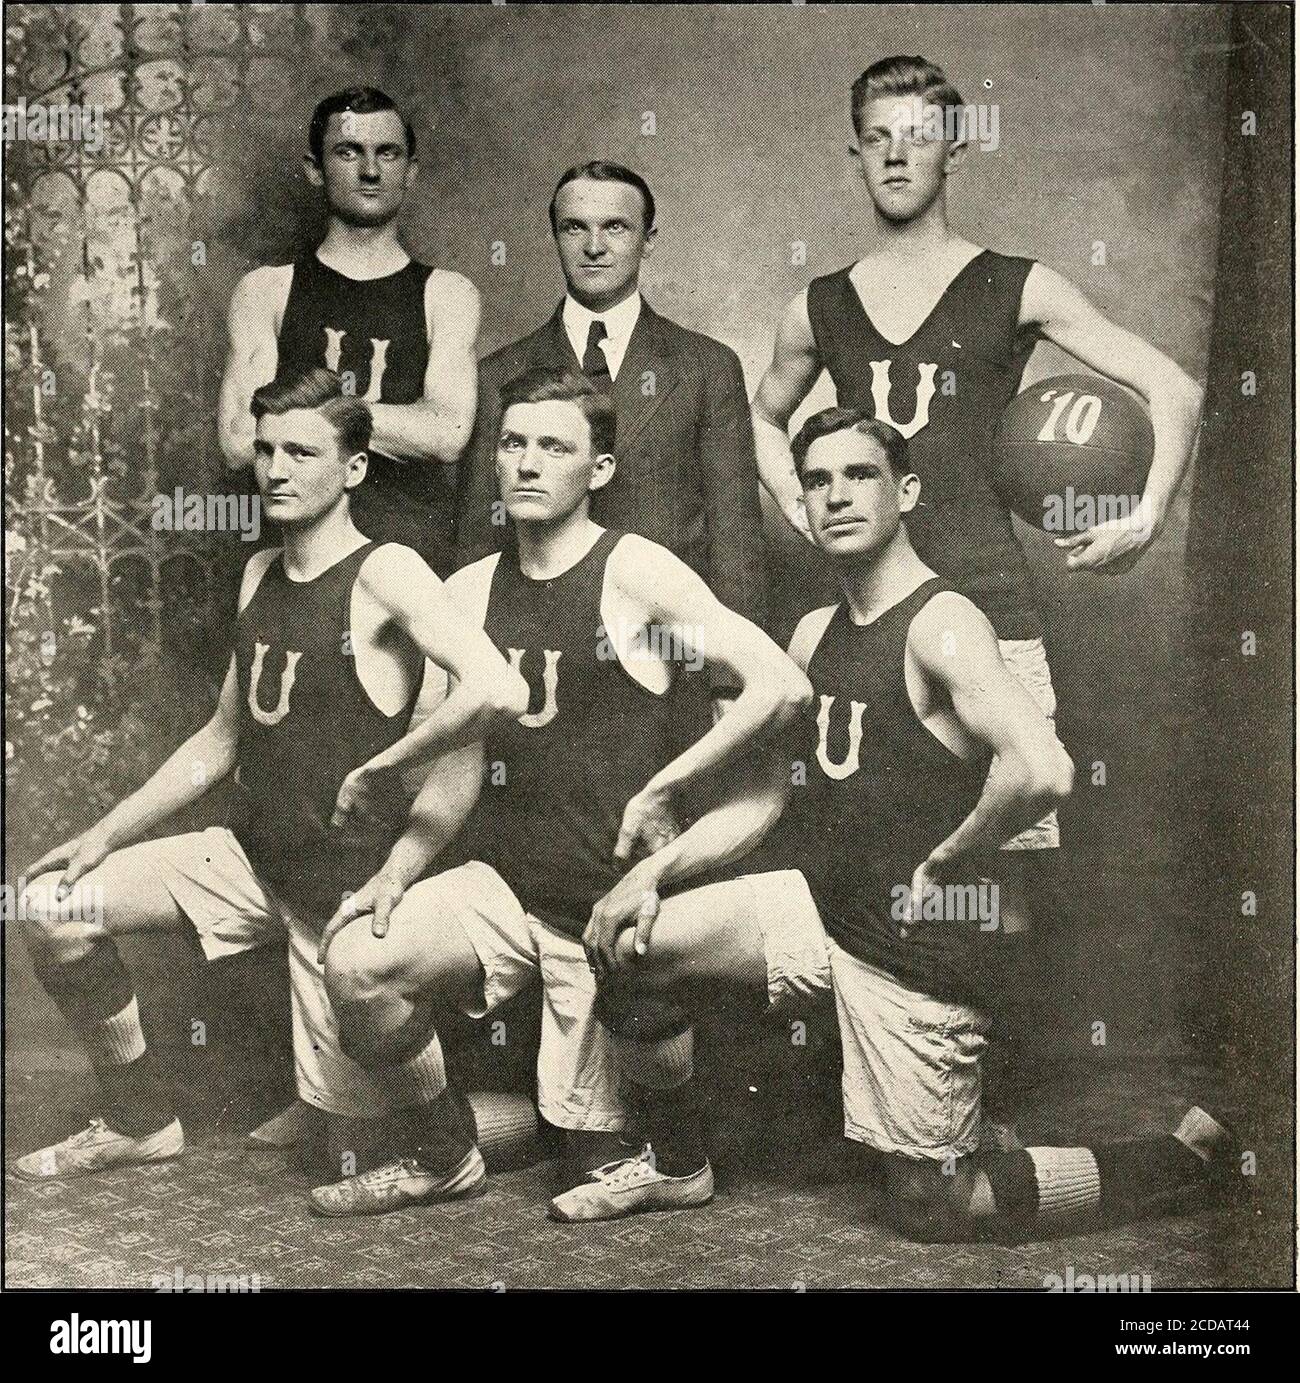 . Lest We Forget 1910 . FOOTBALL TEAM. 117 March 20.Prof. Jones arrives from East Tennessee. laskrt lall ofcam. Professor A. W. Prince GrROVER C. KOFFMAN Hereon C. Pearson CoachManager. Captain piapcr$. Johnson ....... Pearson Gr. C. KOFFMAN Farmer j. c. koffman ..... Baker, Dean, Denny and Prescott Center Right Forward Left Forward Right Guard Left Guard . Substitutes (Sames. Scores for last two seasons by the same five. Union vs. Memphis University School, 28 to 15. Union vs. Fitzgerald-Clarke, 43 to 17. Union vs. Memphis University School, 31 to 43. Union vs. Jackson High School, 54 to 9. U Stock Photo